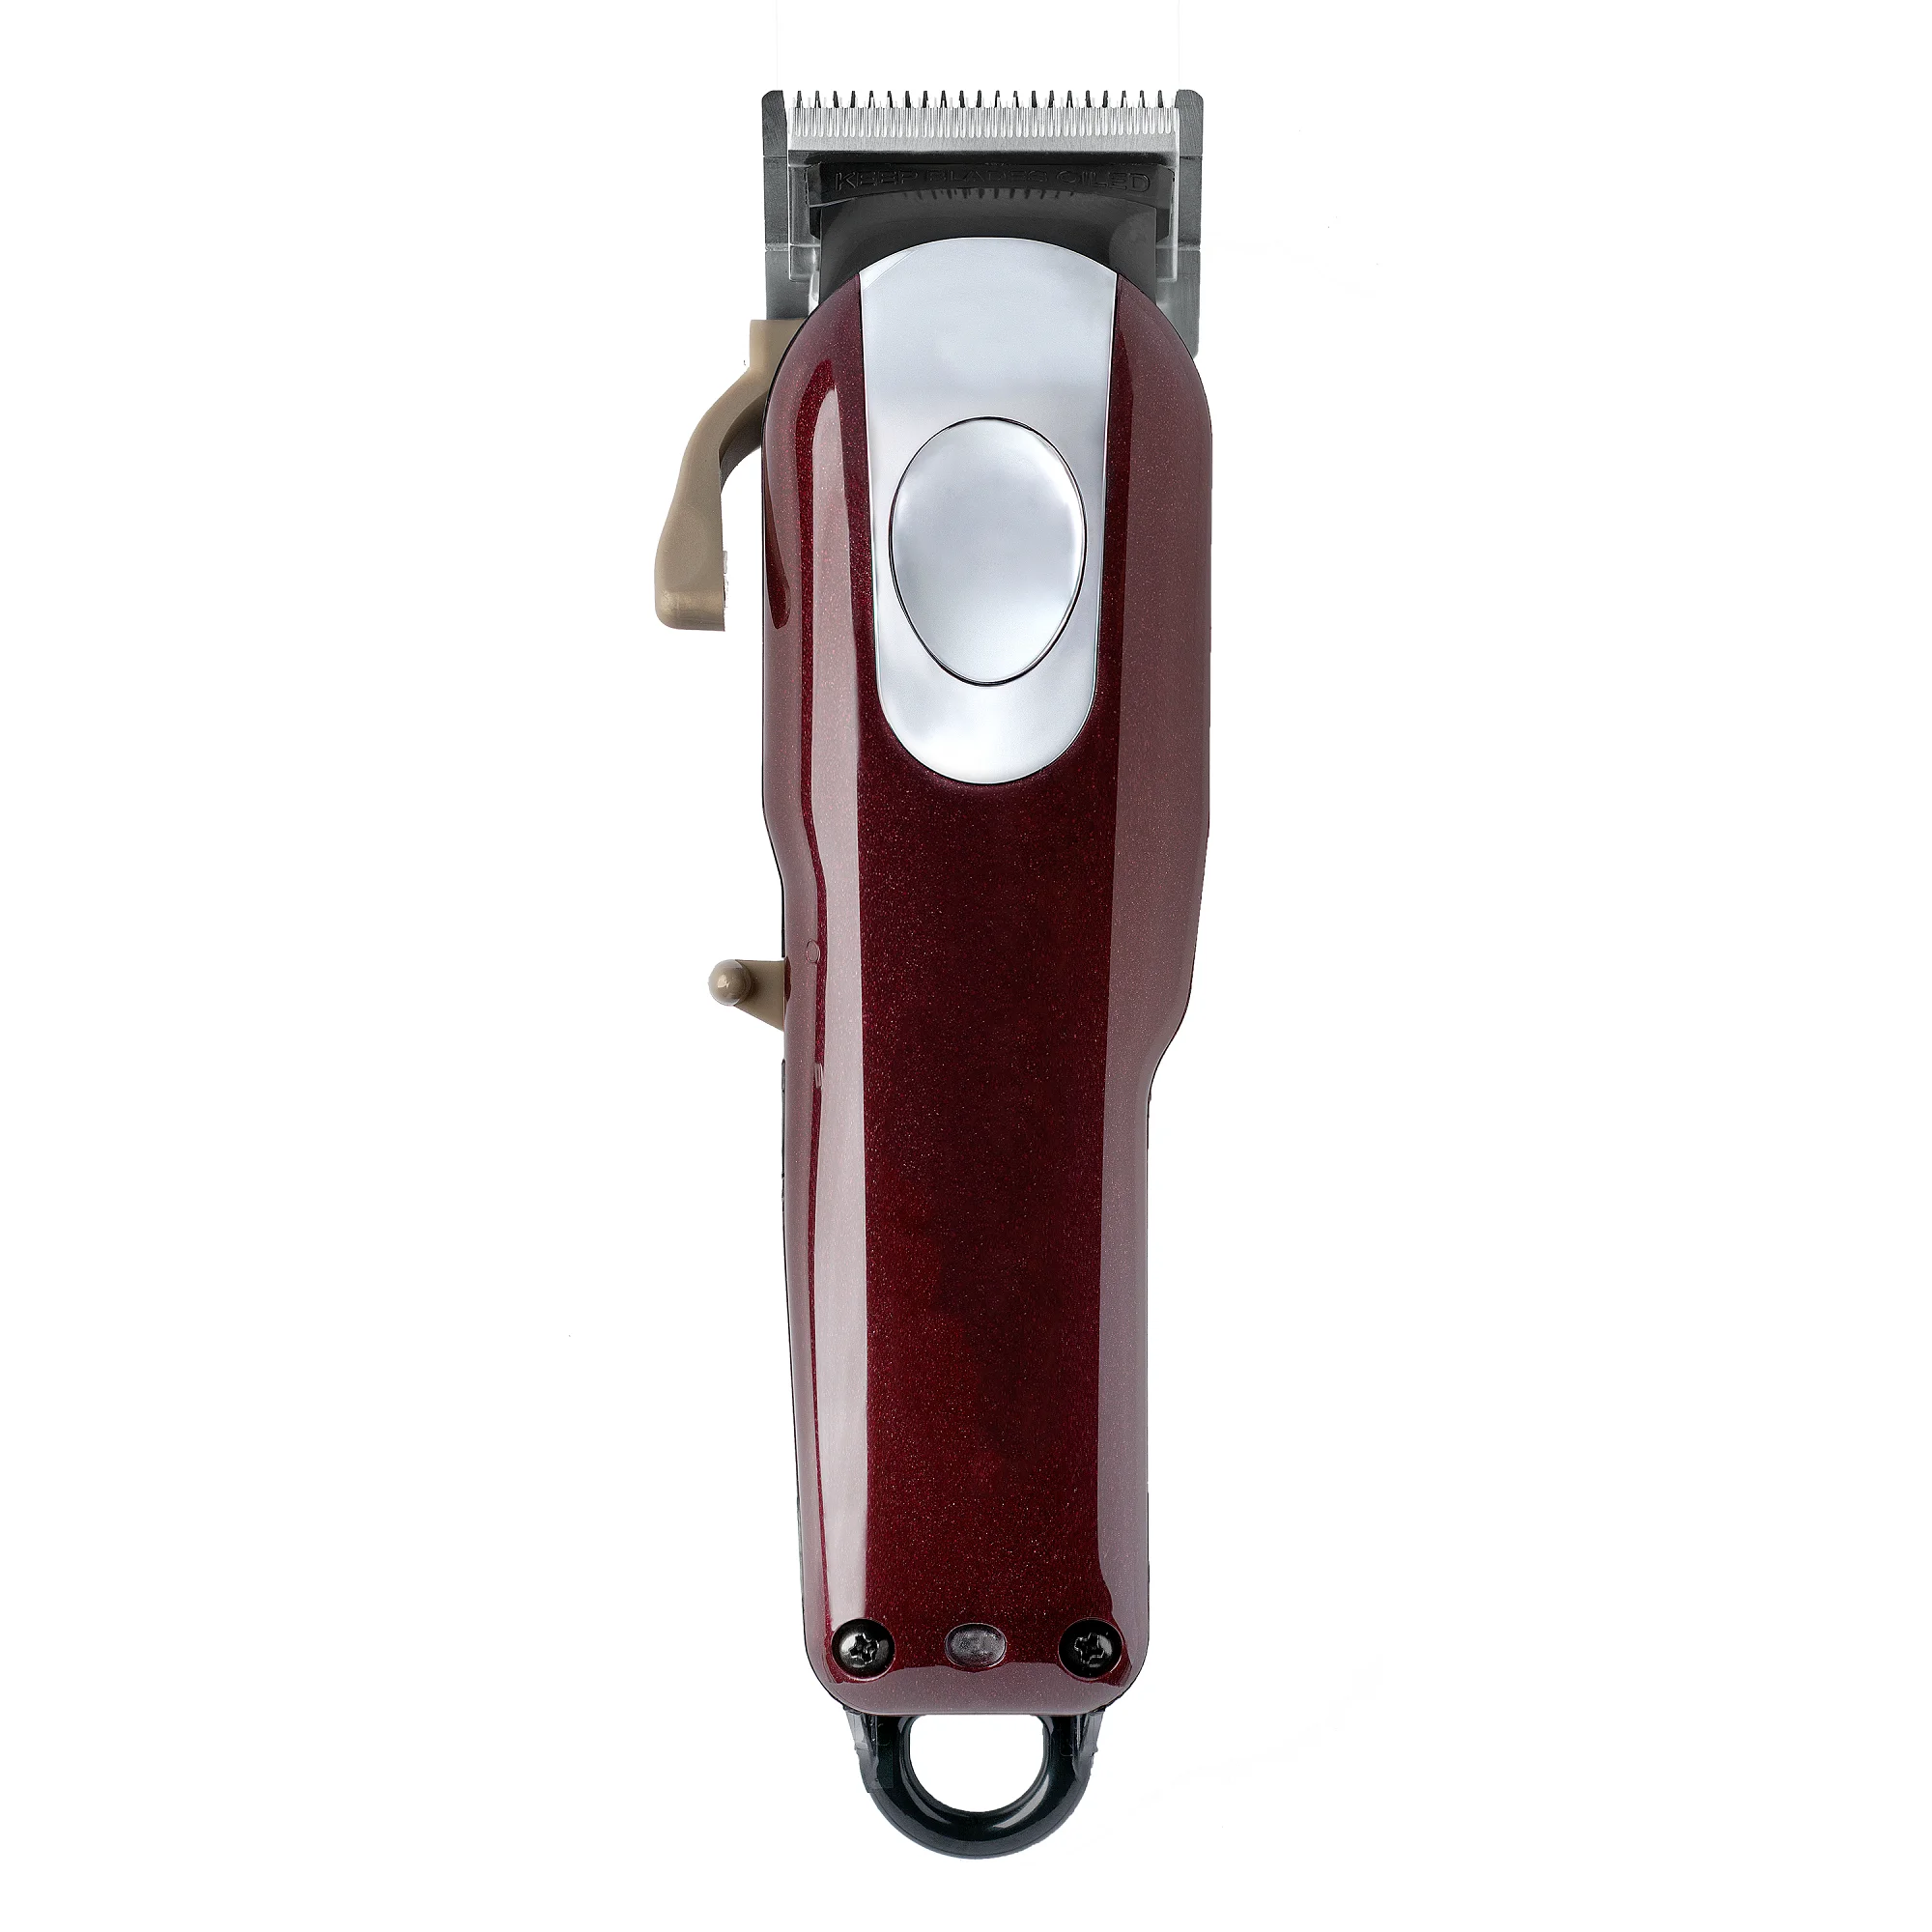 

8148 magic red Men Electric Hair Clippers Cordless Adult Razors Professional Local barber hair trimmer Corner Razor Hairdresse F